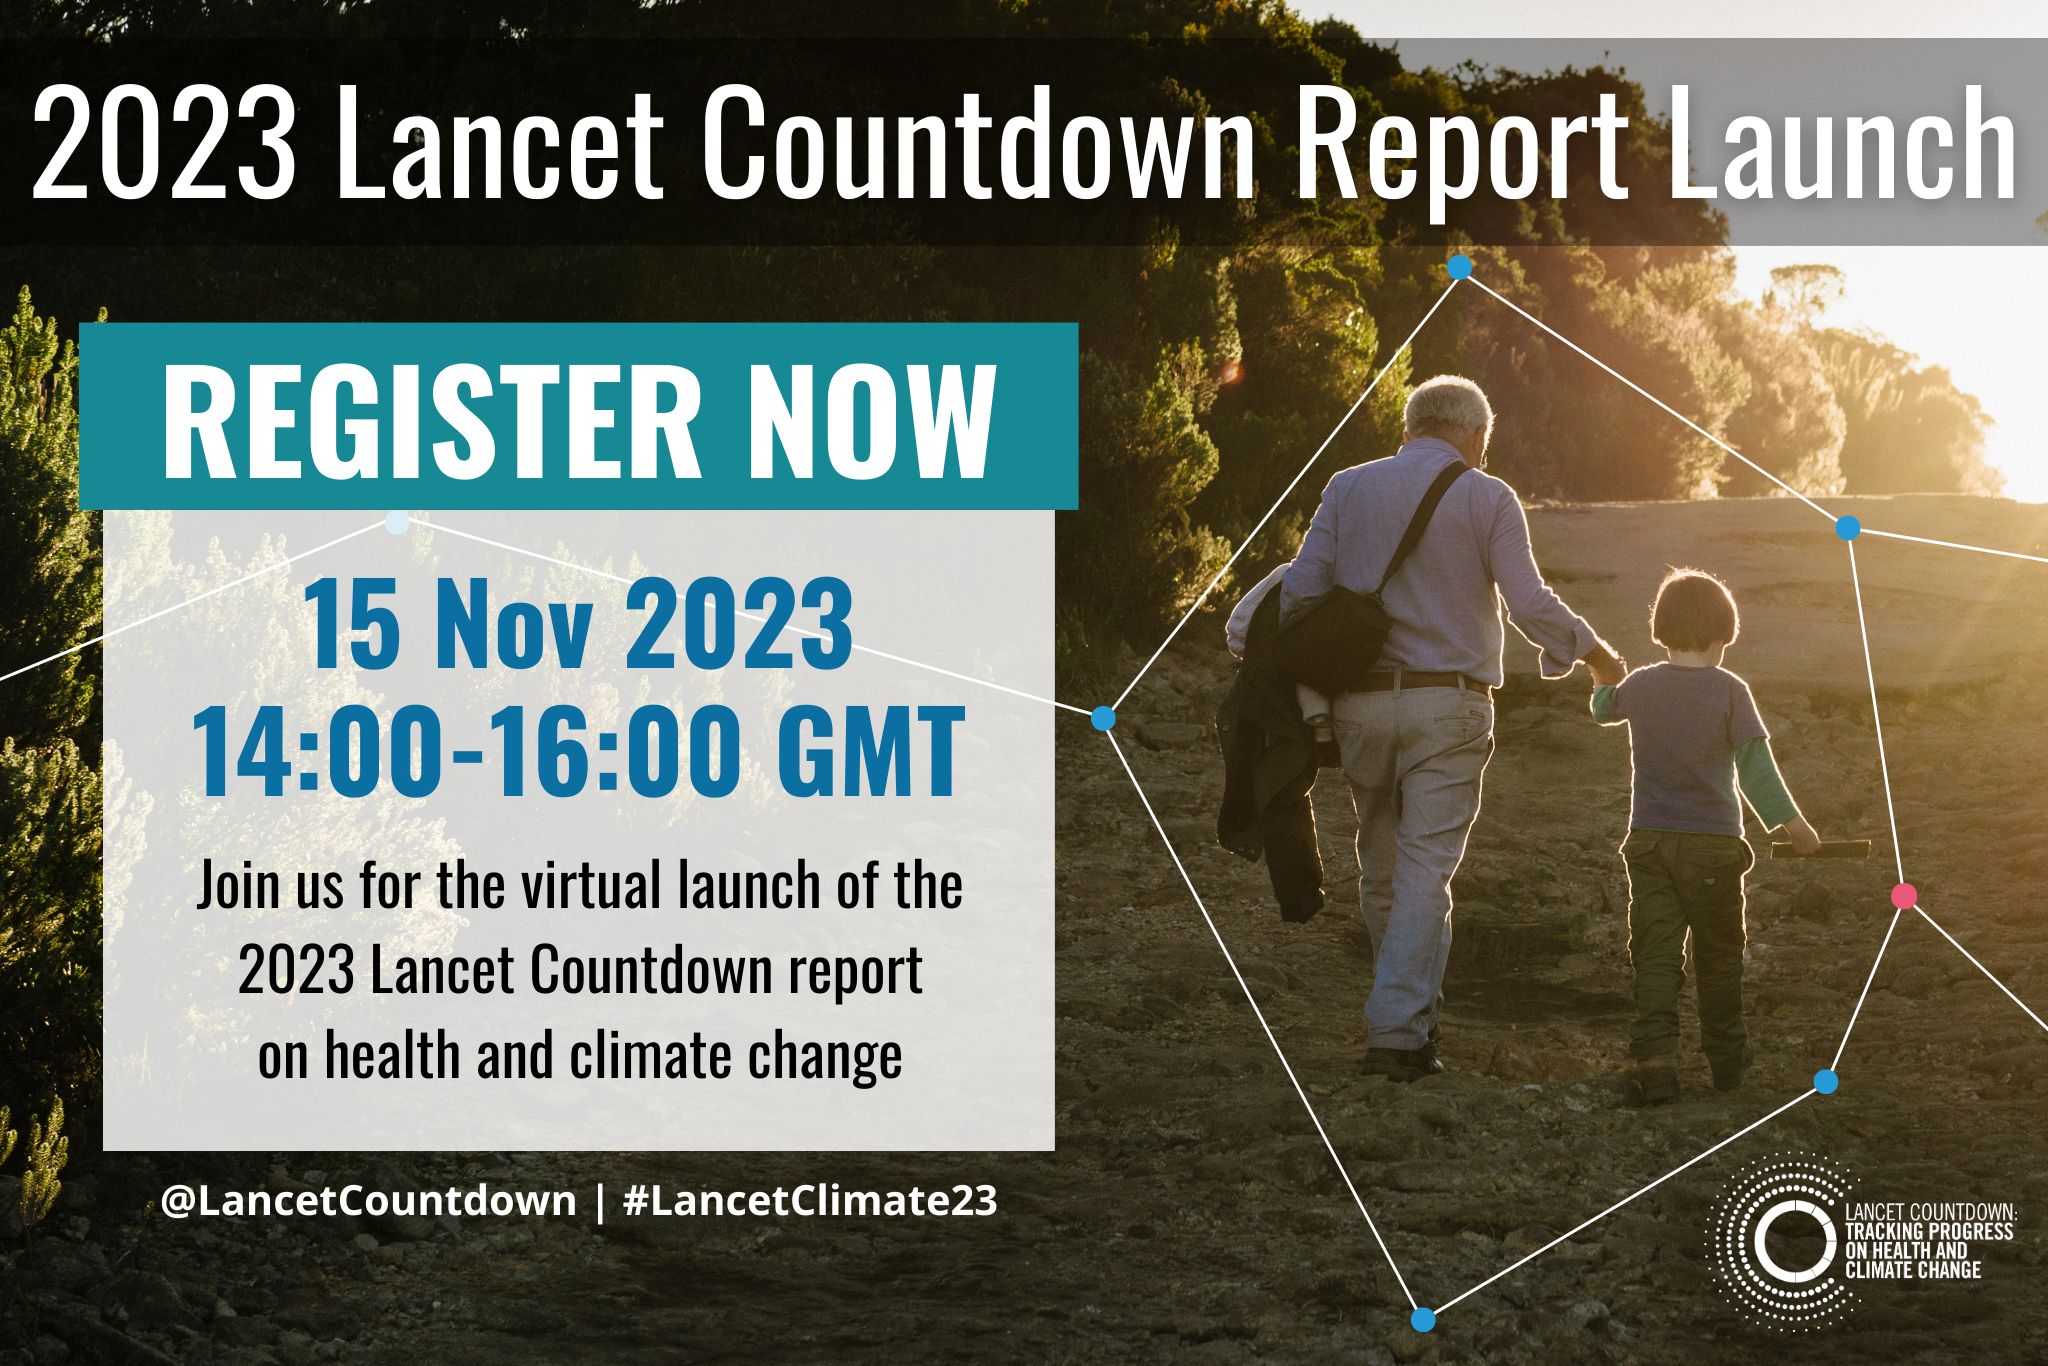 Lancet Countdown on Health and Climate Change